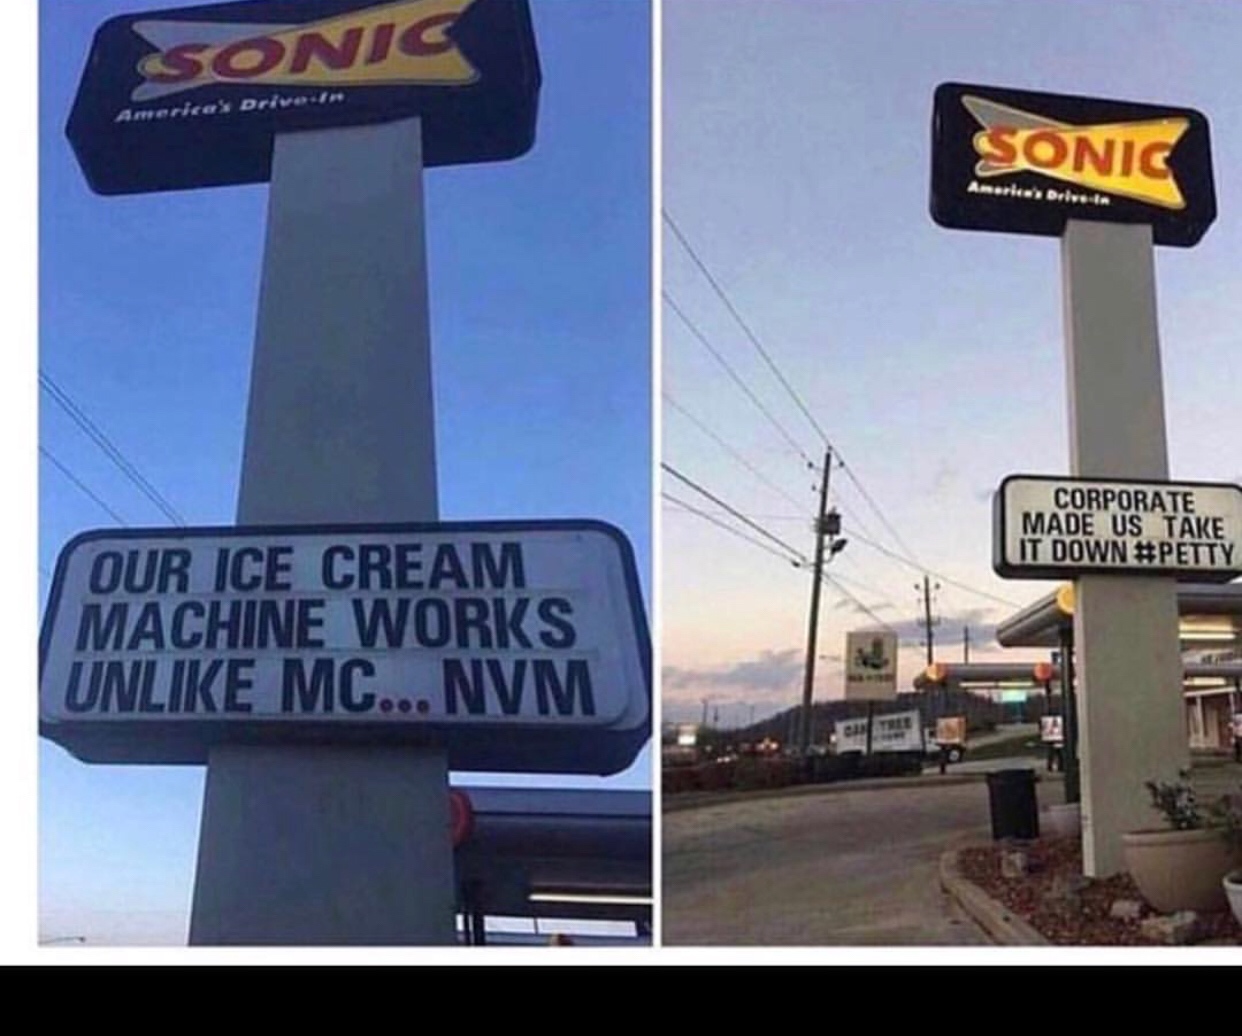 sonic restaurant meme - Sonic American Drive.tr Sonic erial DriveIn Corporate Made Us Take It Down Our Ice Cream Machine Works Un Mc... Nvm